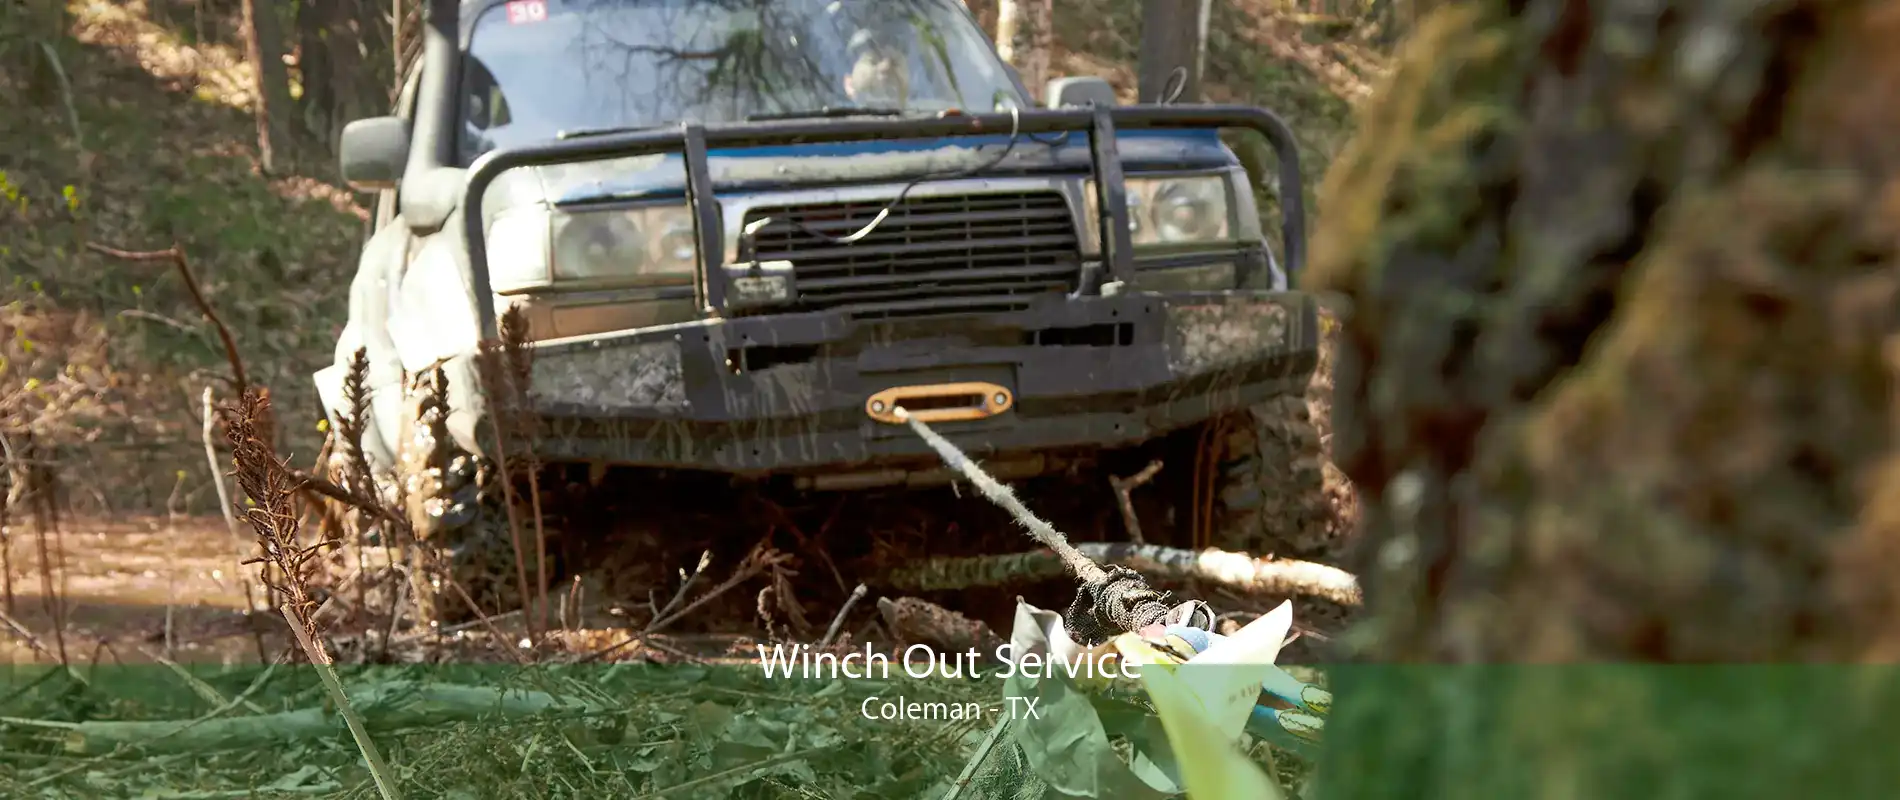 Winch Out Service Coleman - TX